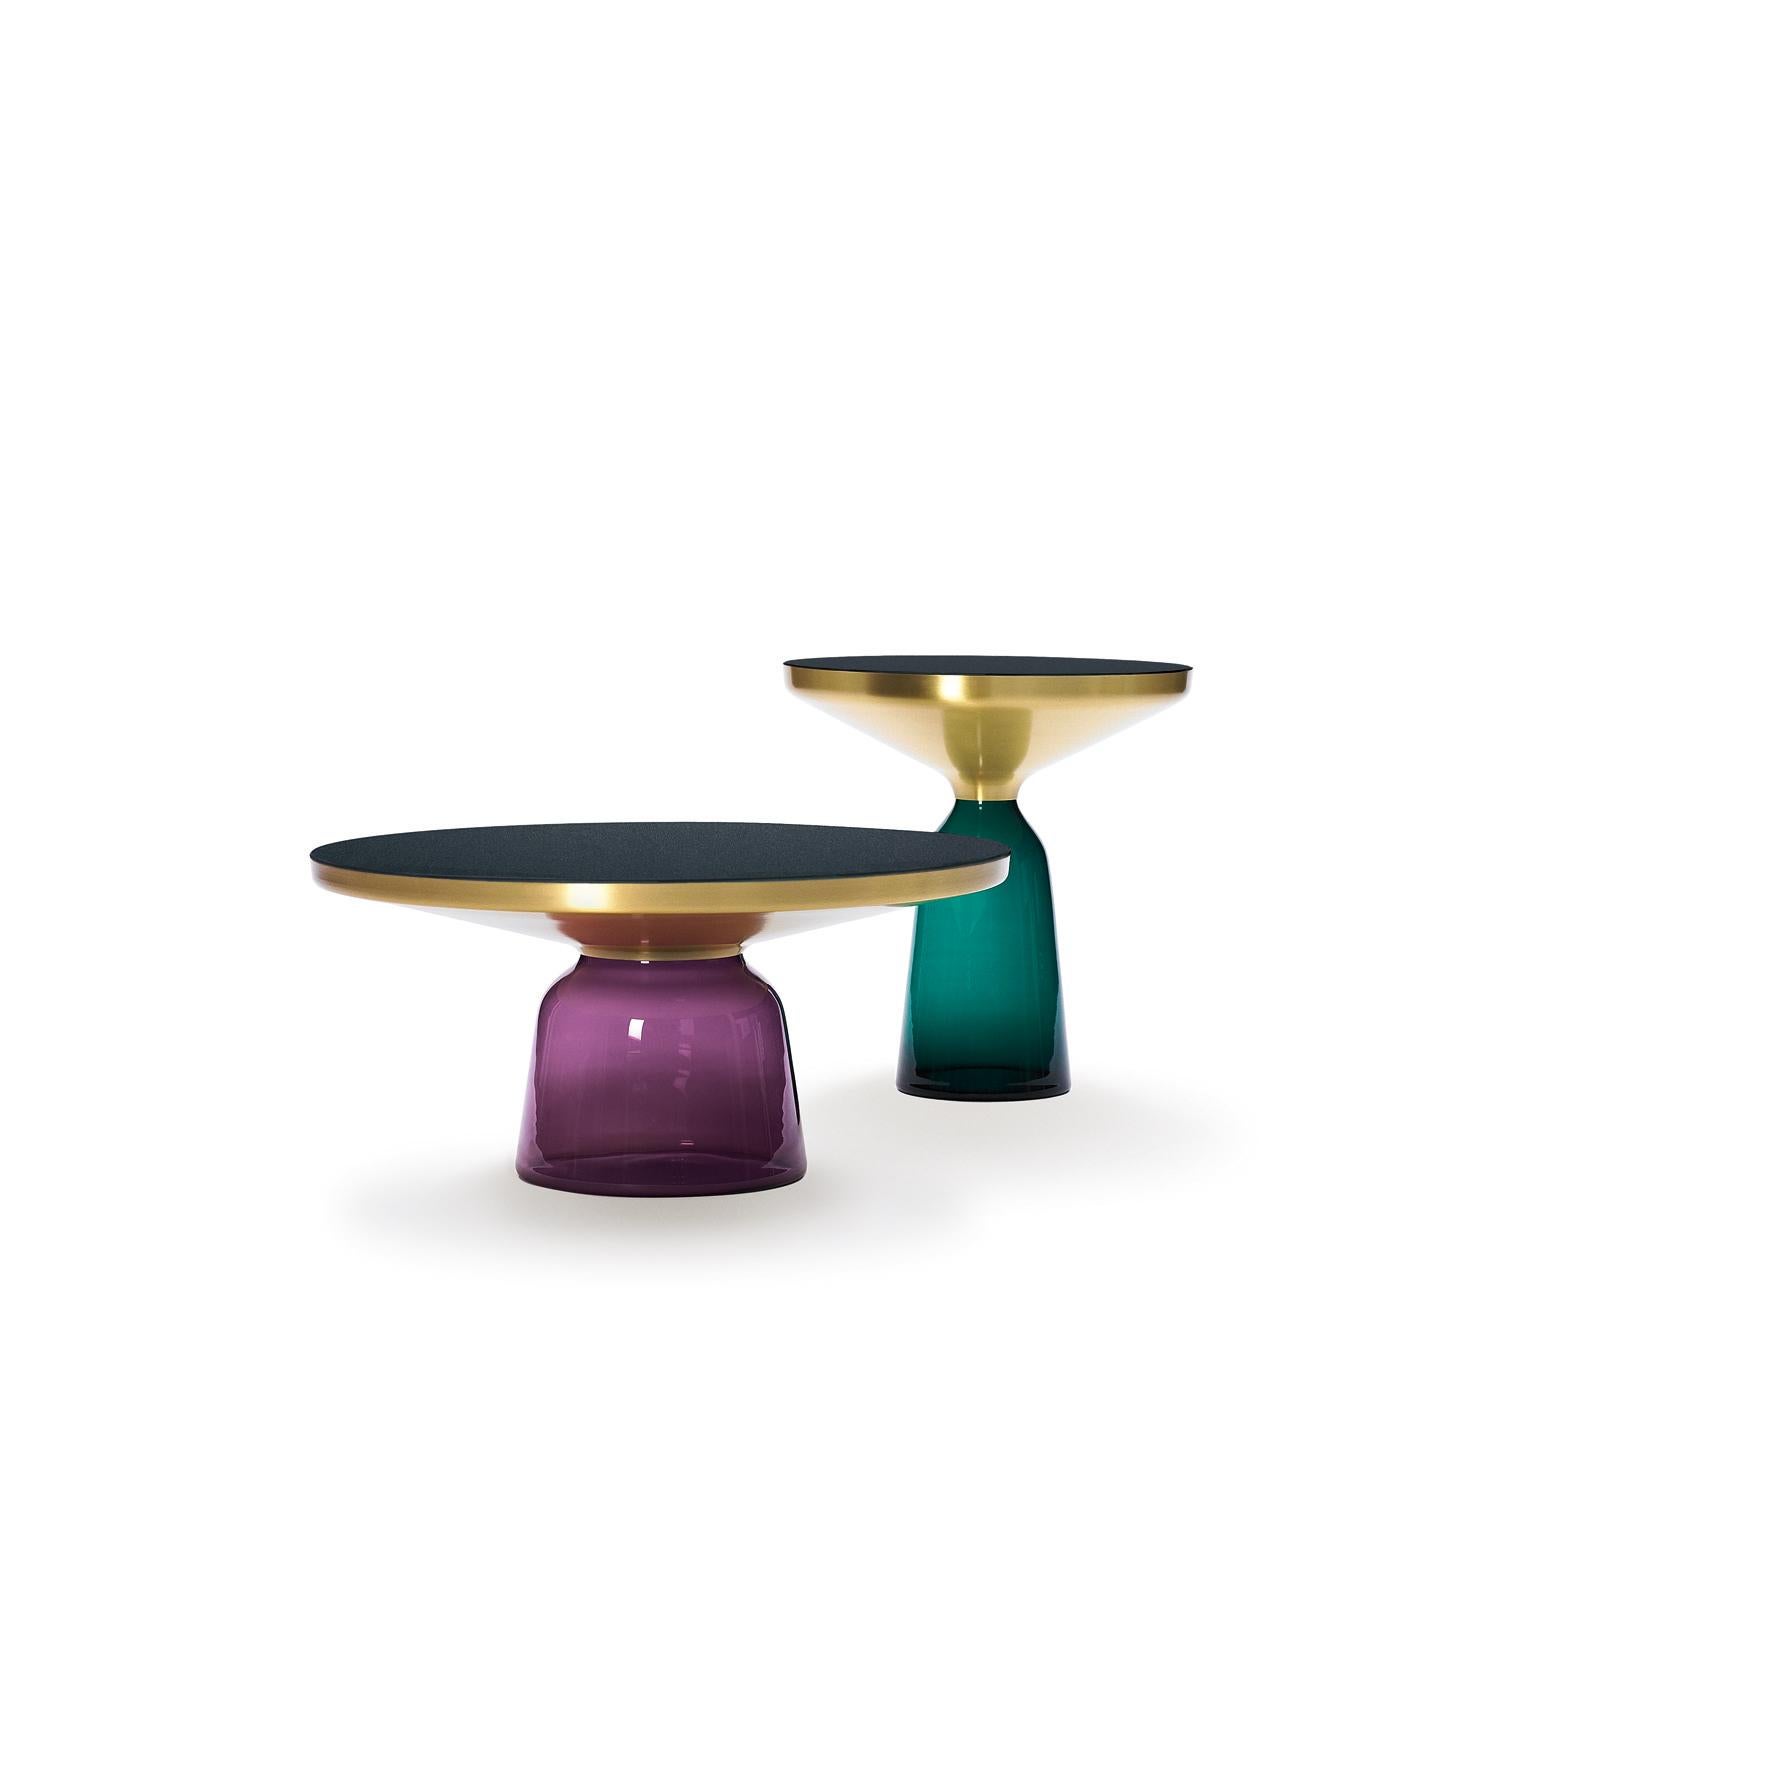 The “Bell Table” by Sebastian Herkner turns our perceptual habits on their head, using the lightweight, fragile material of glass as base for a metal top that seems to float above it. Hand blown in the traditional manner using a wooden mold, the